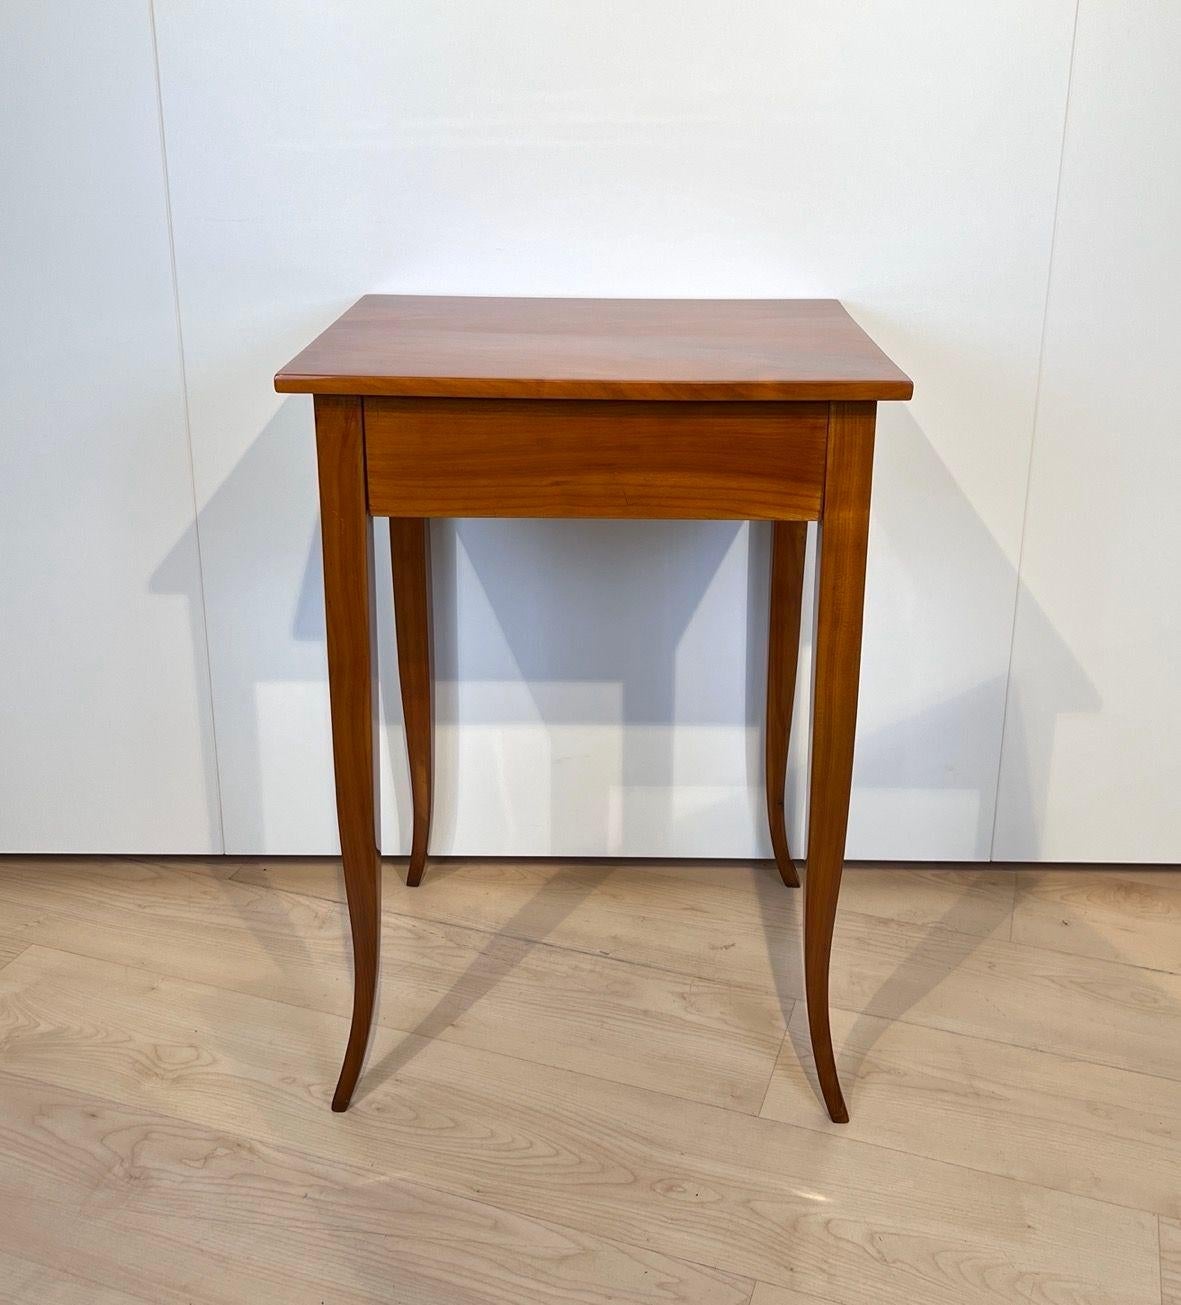 Elegant straight-lined Biedermeier side table with drawer from South Germany circa 1825.
Solid cherry wood. Restored and hand-polished with shellac.
Dimensions:
* H 77 cm x W 54 cm x D 43 cm
* H 30,3“ x W 21,25“ x D 16,9“